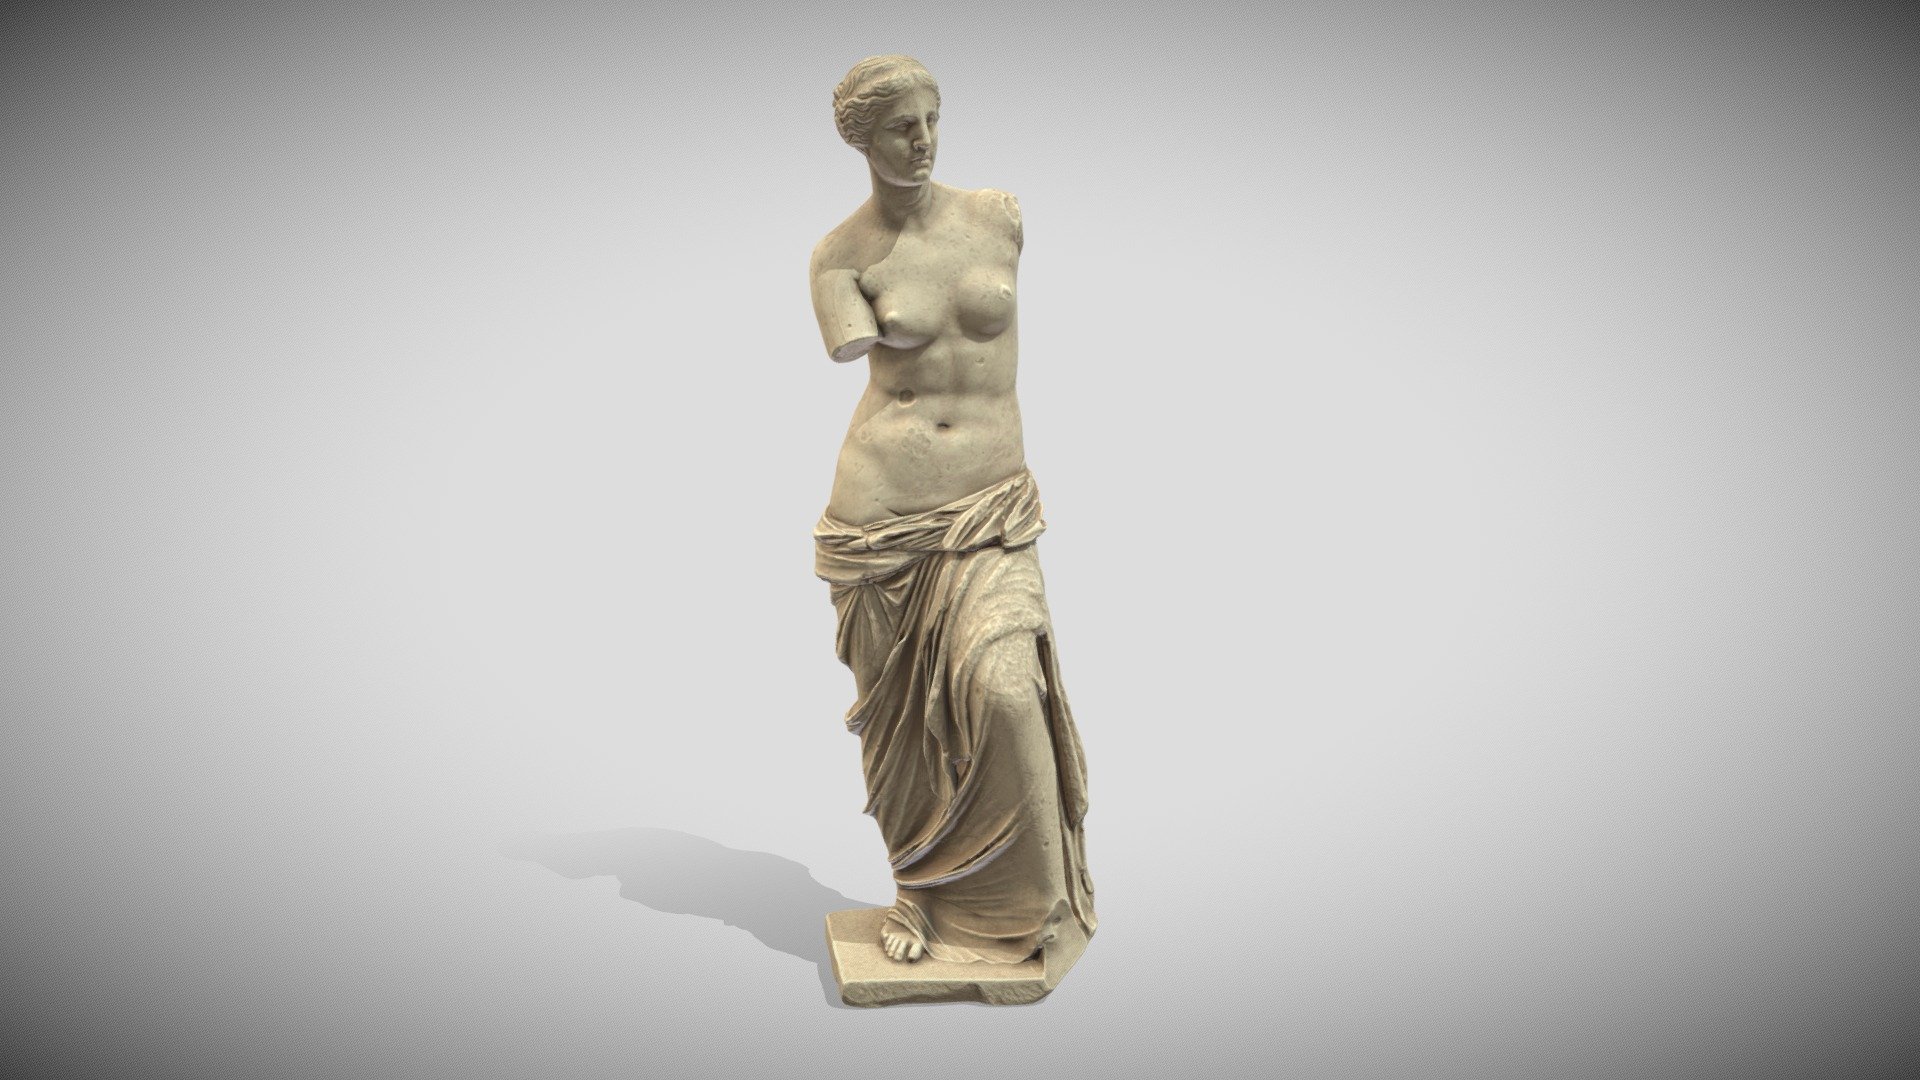 Original very nice 3D Scan from the SMK - Statens Museum for Kunst

http://collection.smk.dk/#/en/detail/KAS434%2F1

here the Painted Gaming Version LR... 3d model